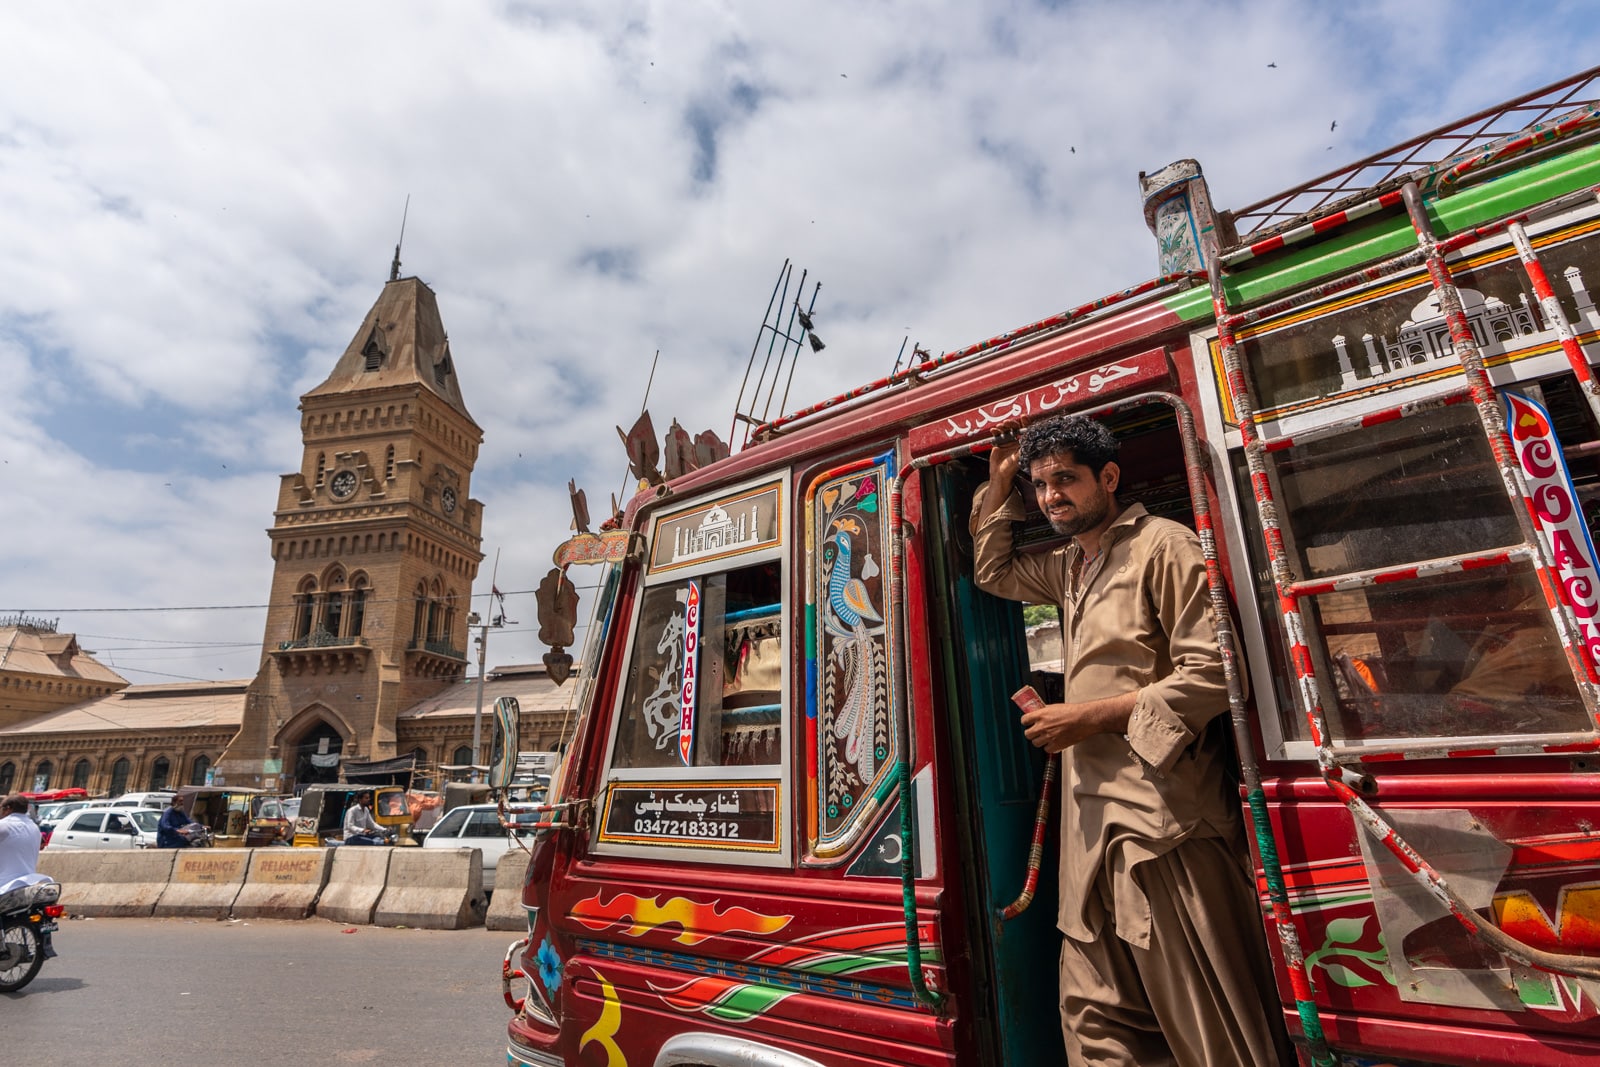 Sinidh travel guide - Trippy rainbow buses in Karachi, Pakistan - Lost With Purpose travel blog